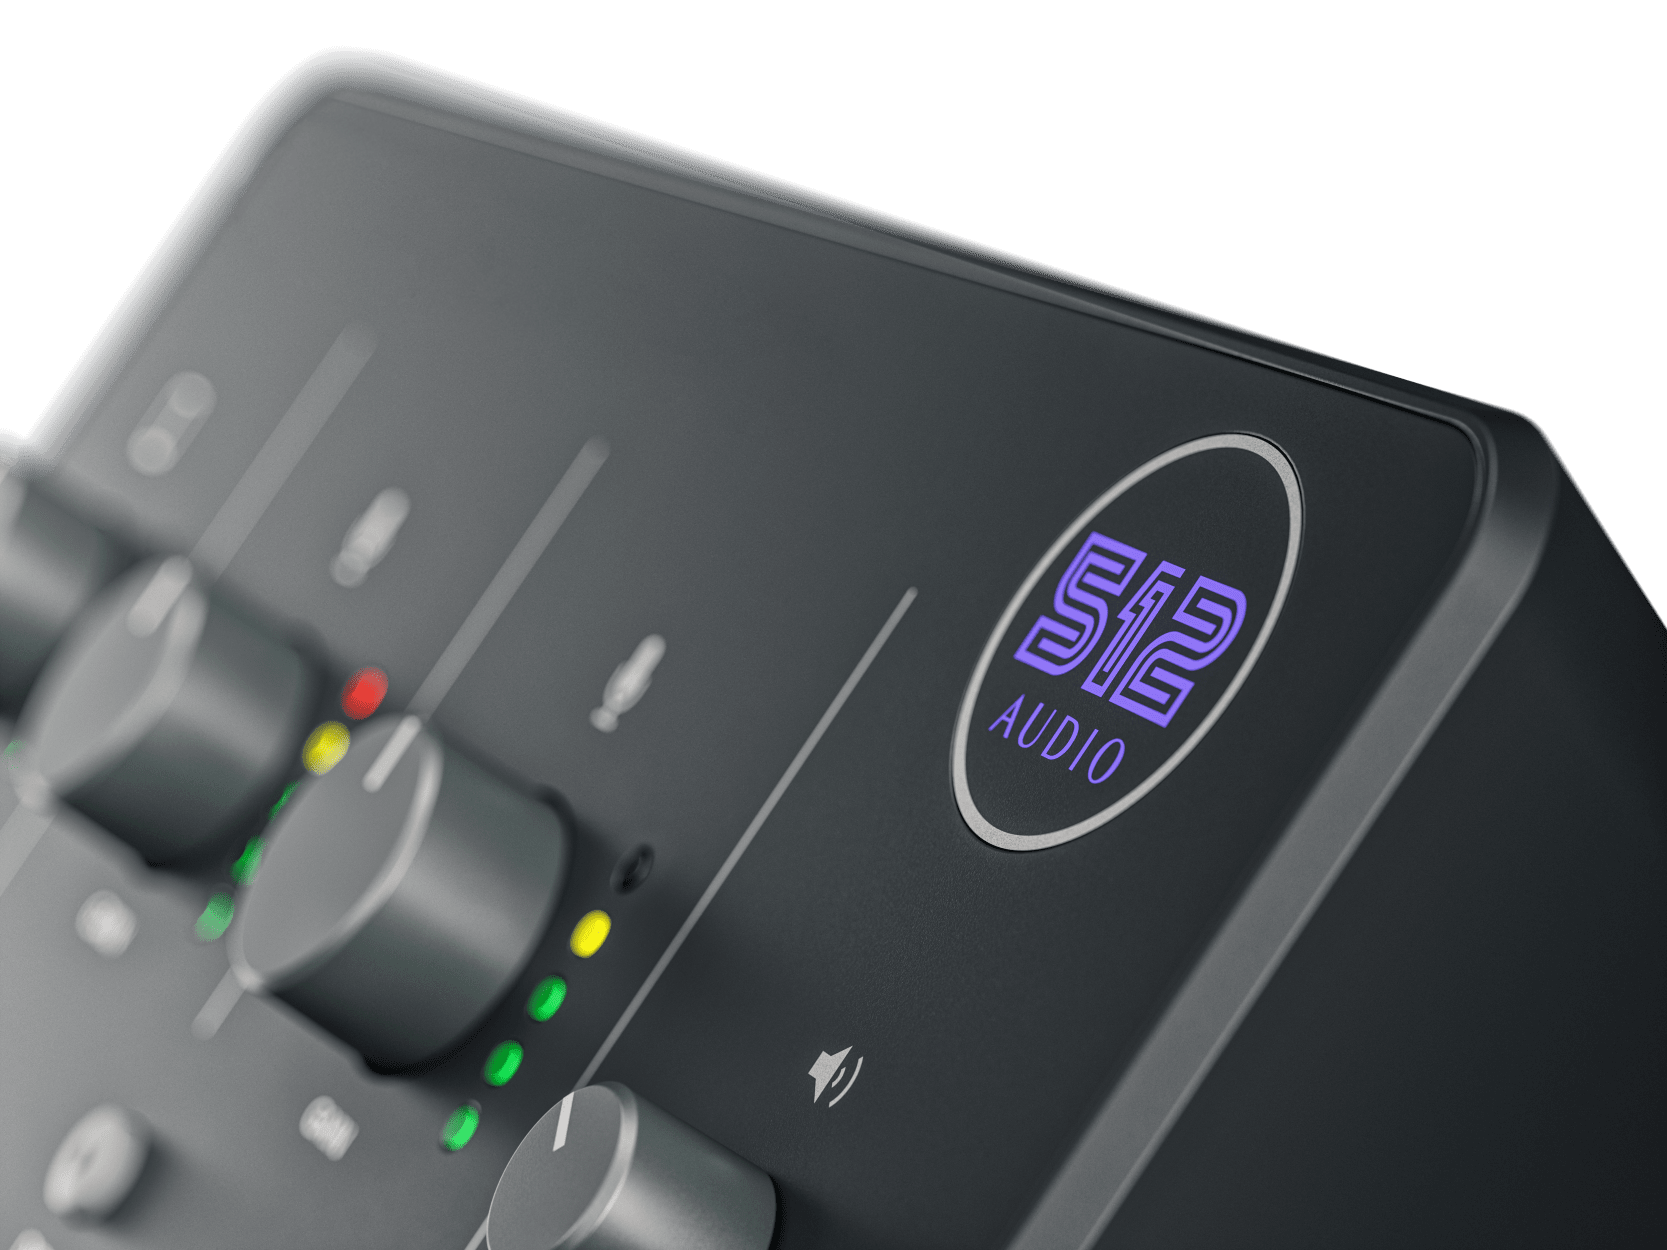 512 Audio expands product range with USB microphones and USB audio interface